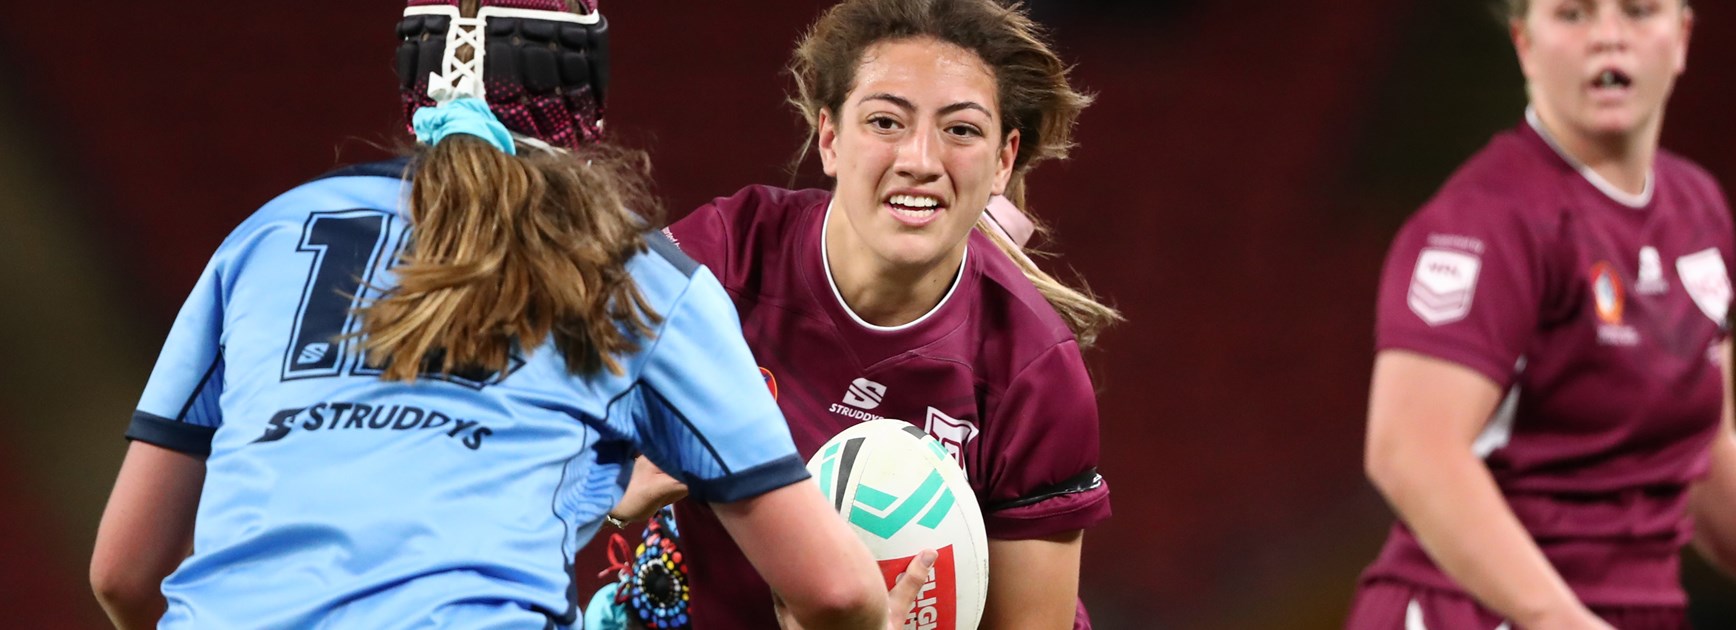 Roosters named in Under 19 Women’s Origin Squads